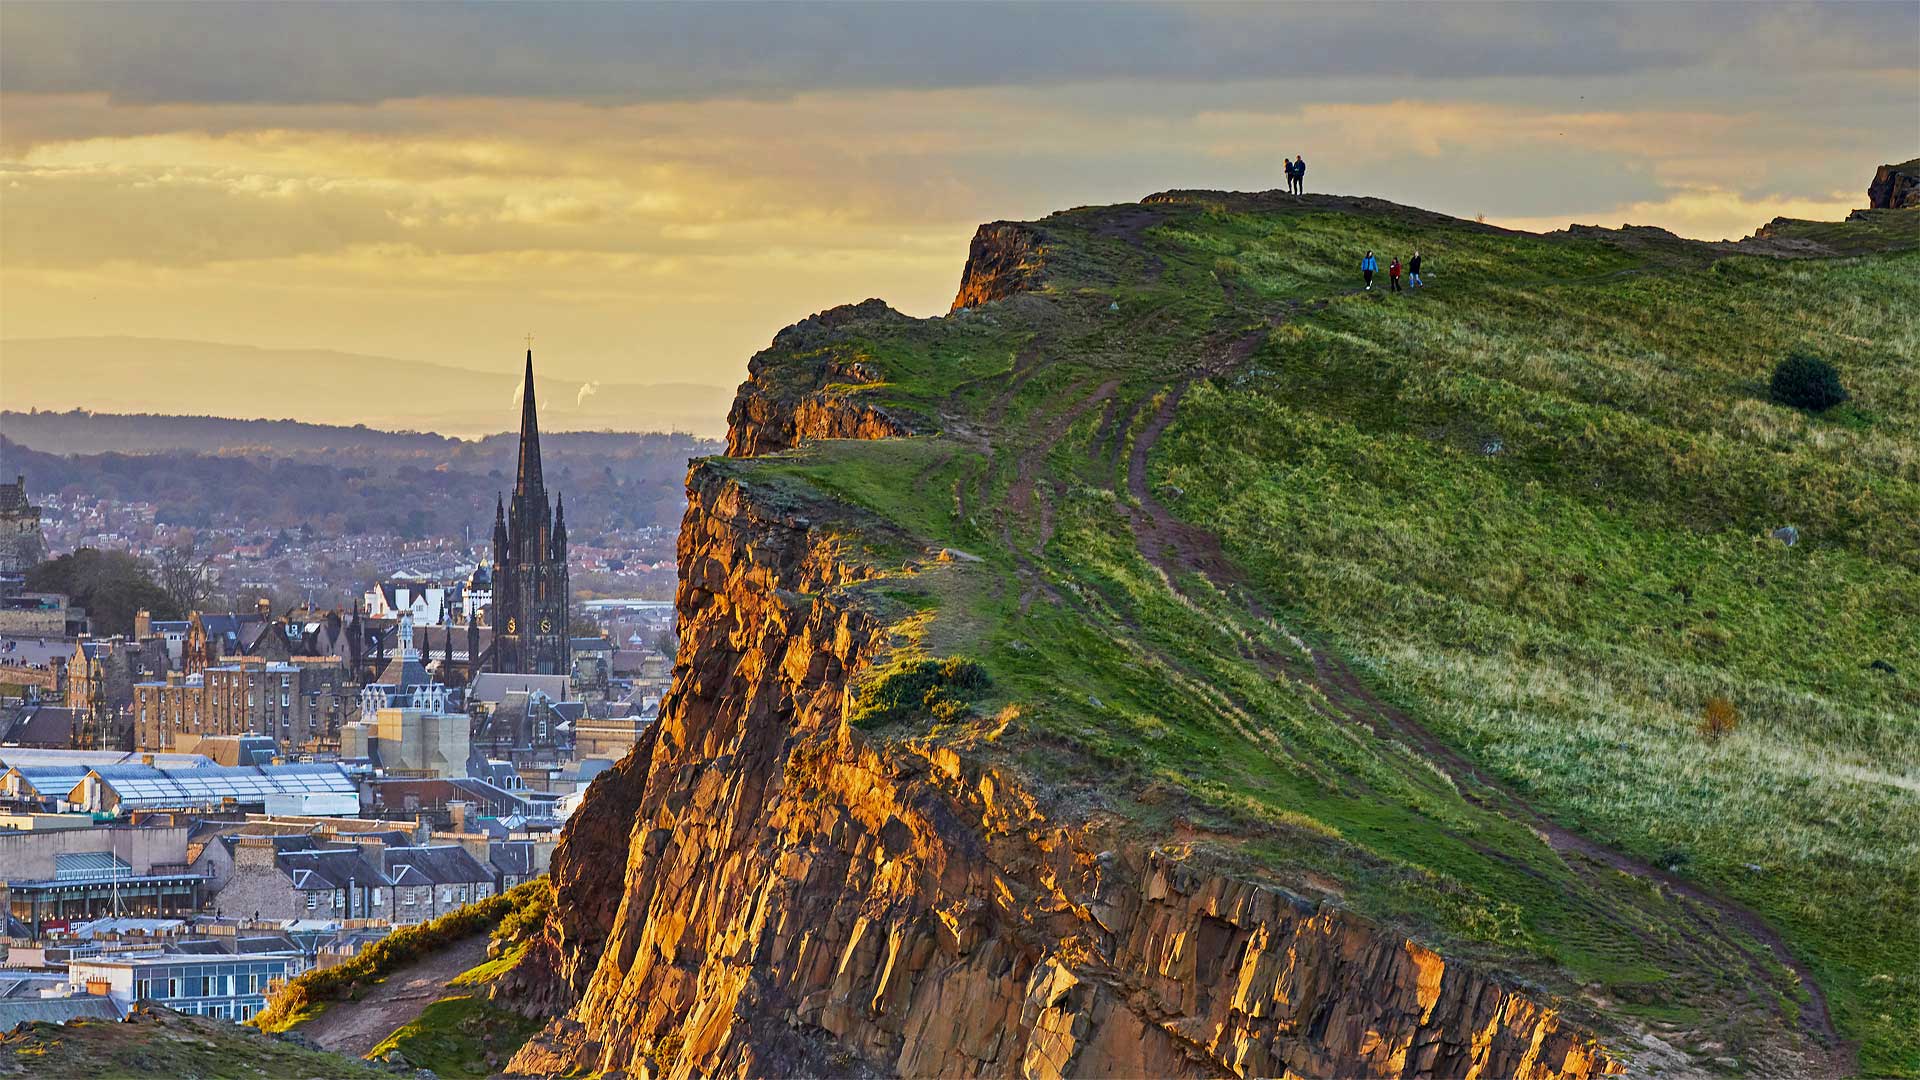 Salisbury Crags in Holyrood Park overlooking Edinburgh, Scotland - Andrew Merry/Getty Images)